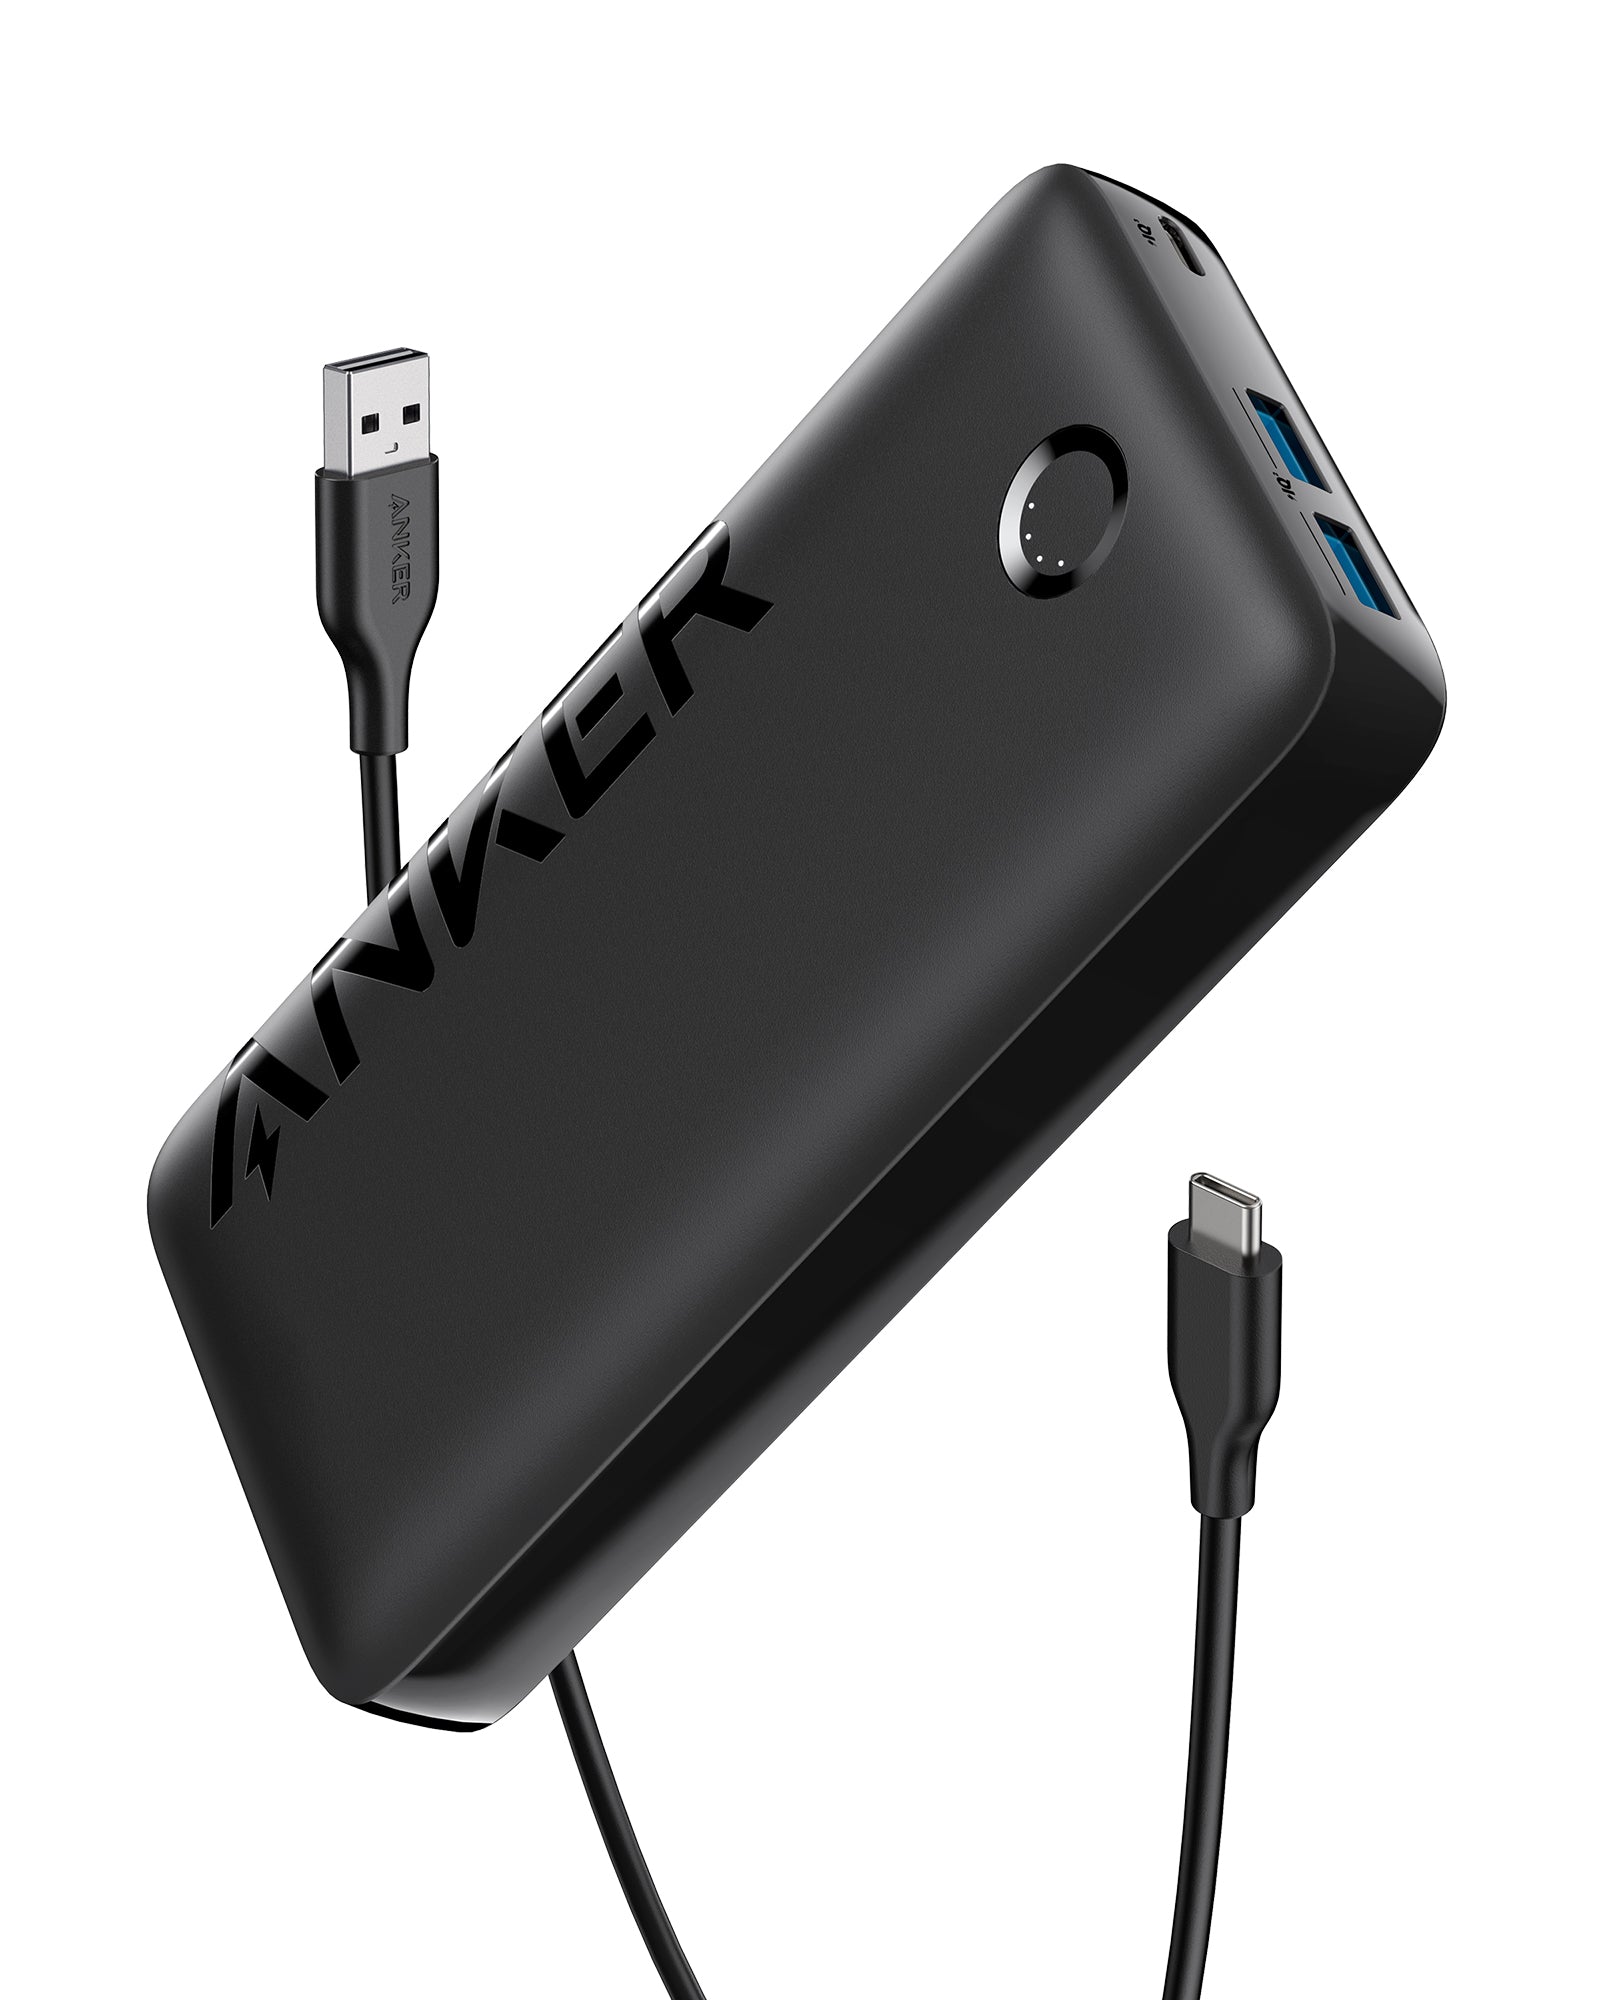 Anker 335 Power Bank PowerCore 20K review - Which?